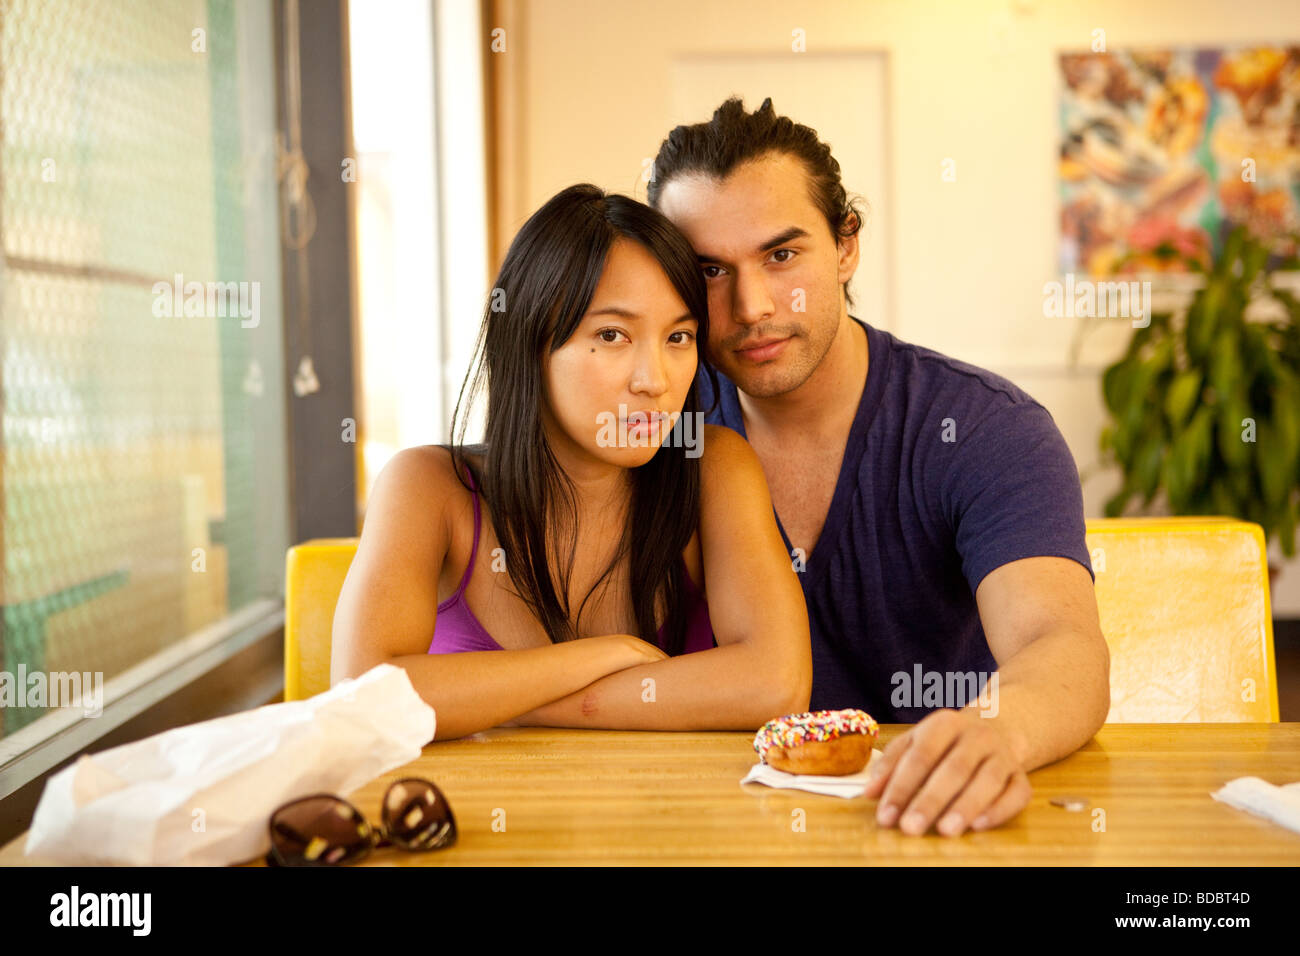 Male Female couple sitting at a table inside a fast food restaurant, looking at camera. Stock Photo